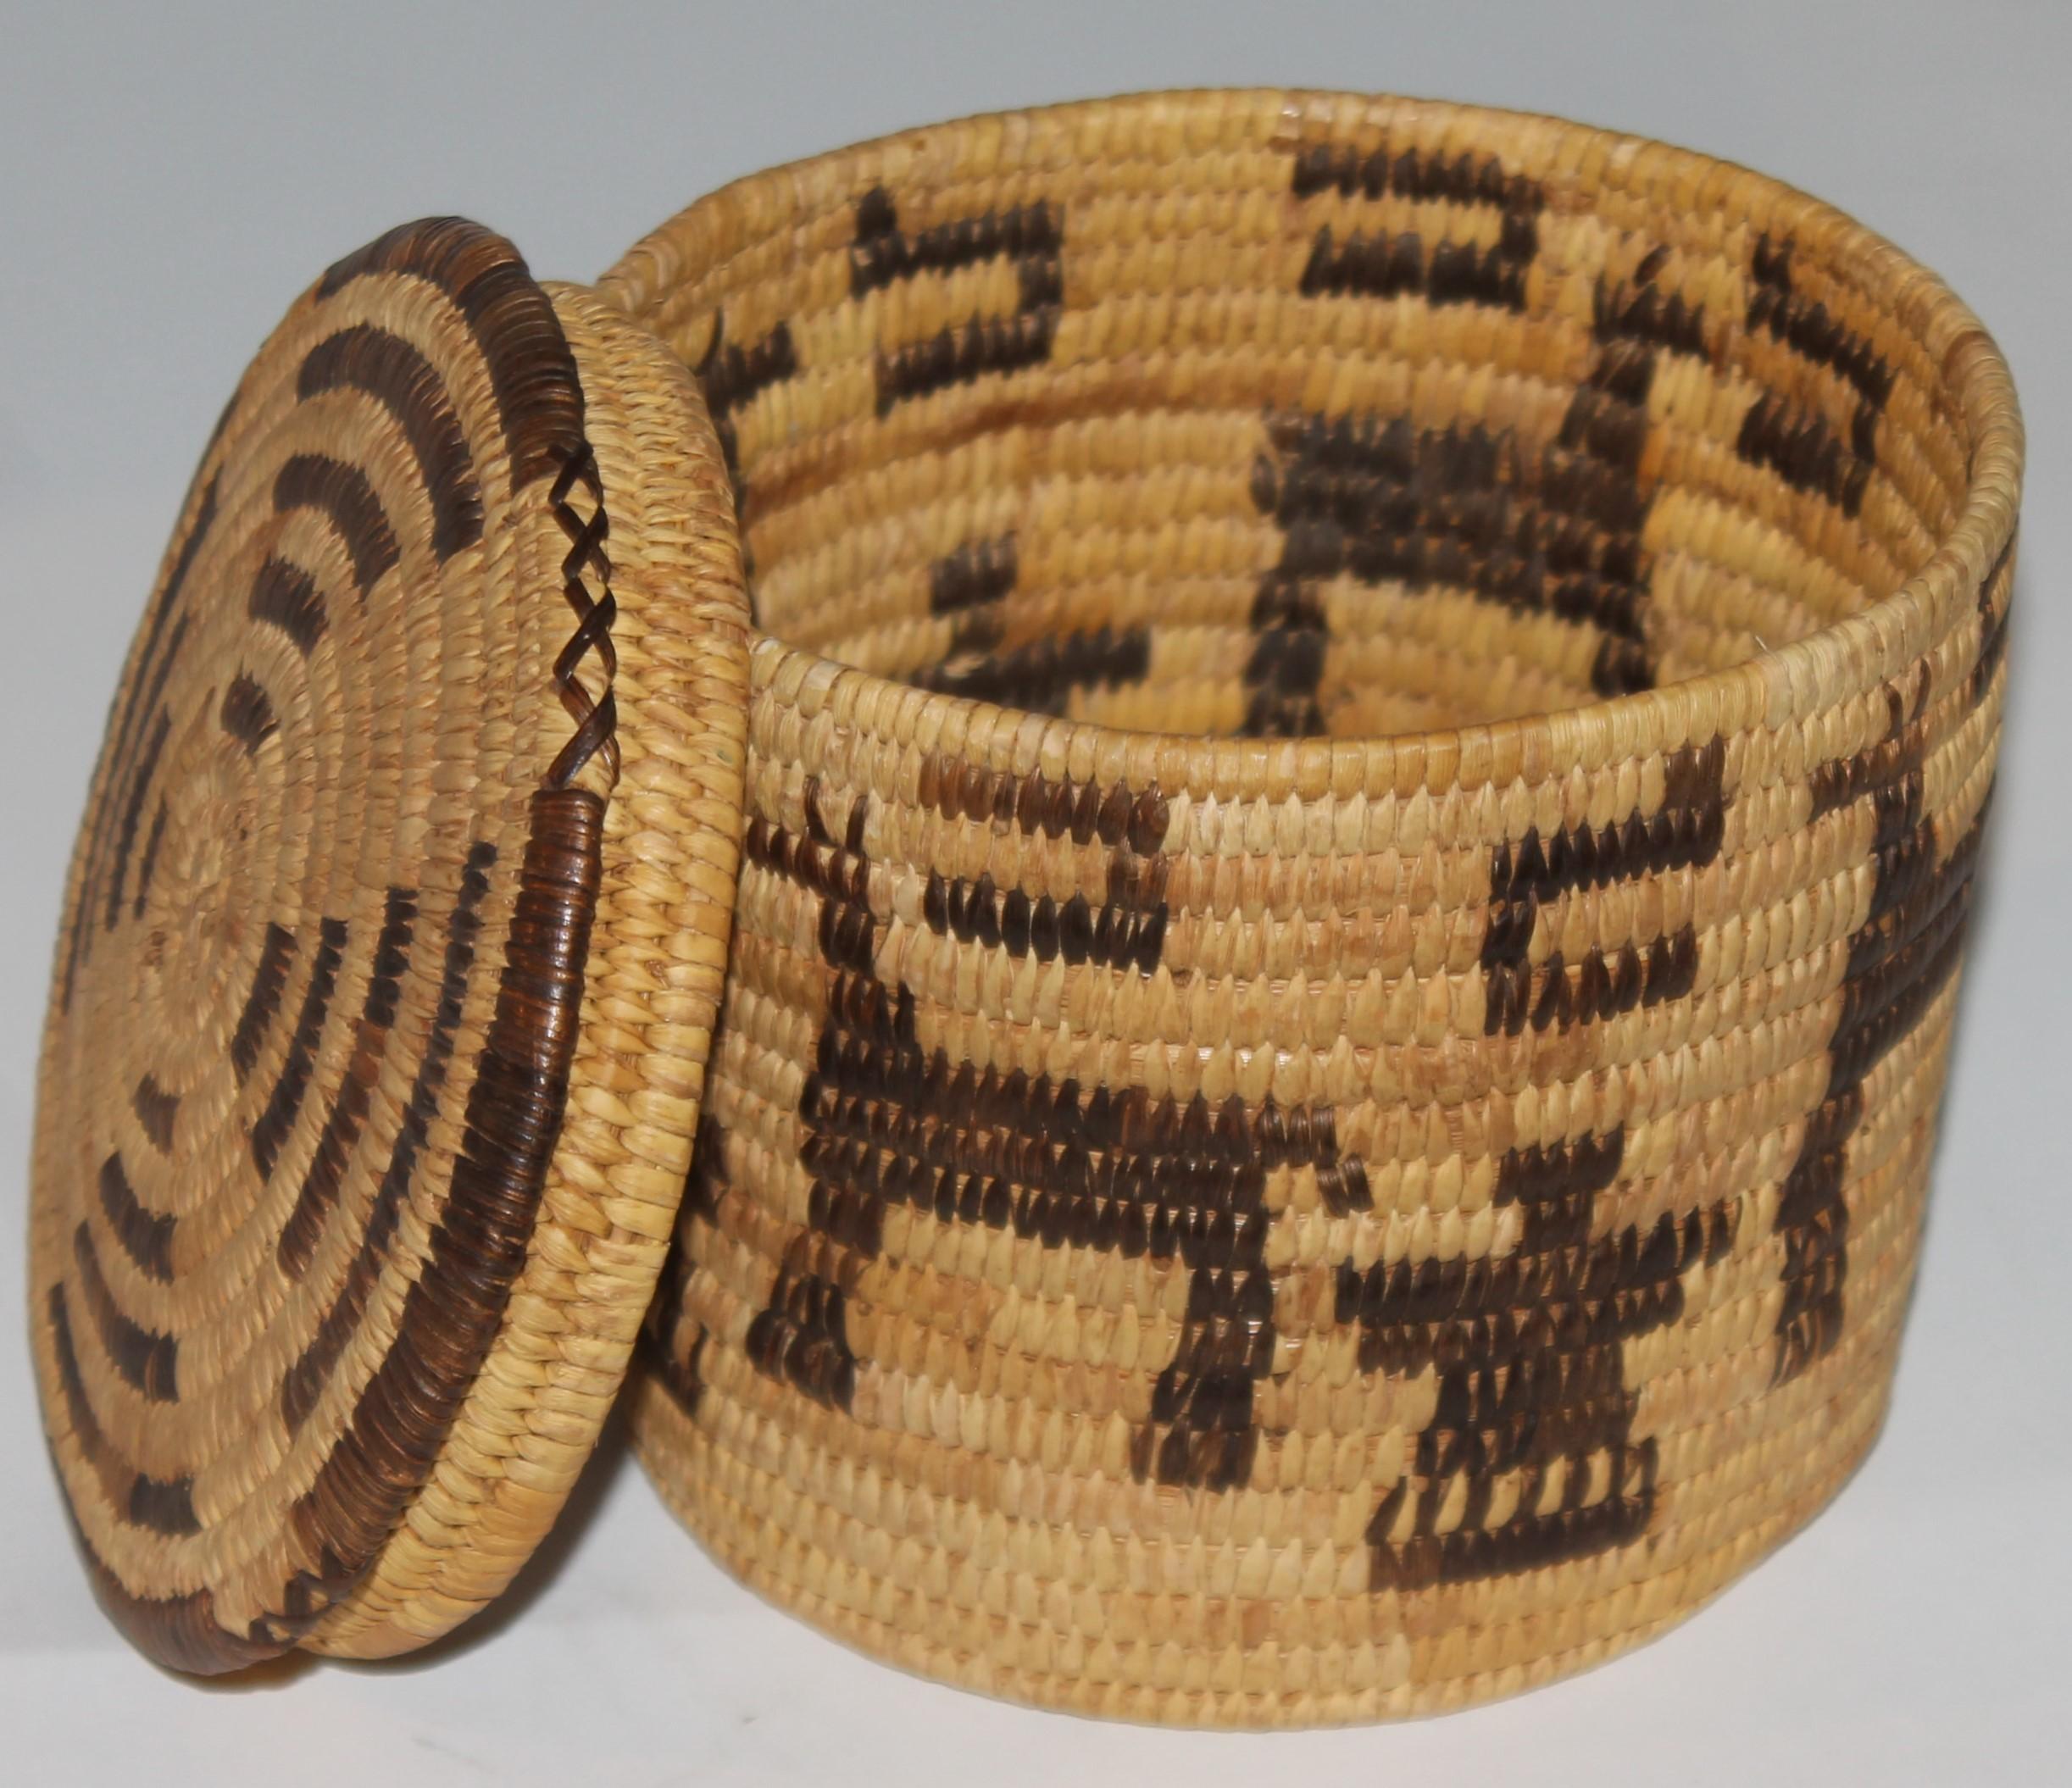 This amazing pictorial Indian basket with the original lid is in fine condition.